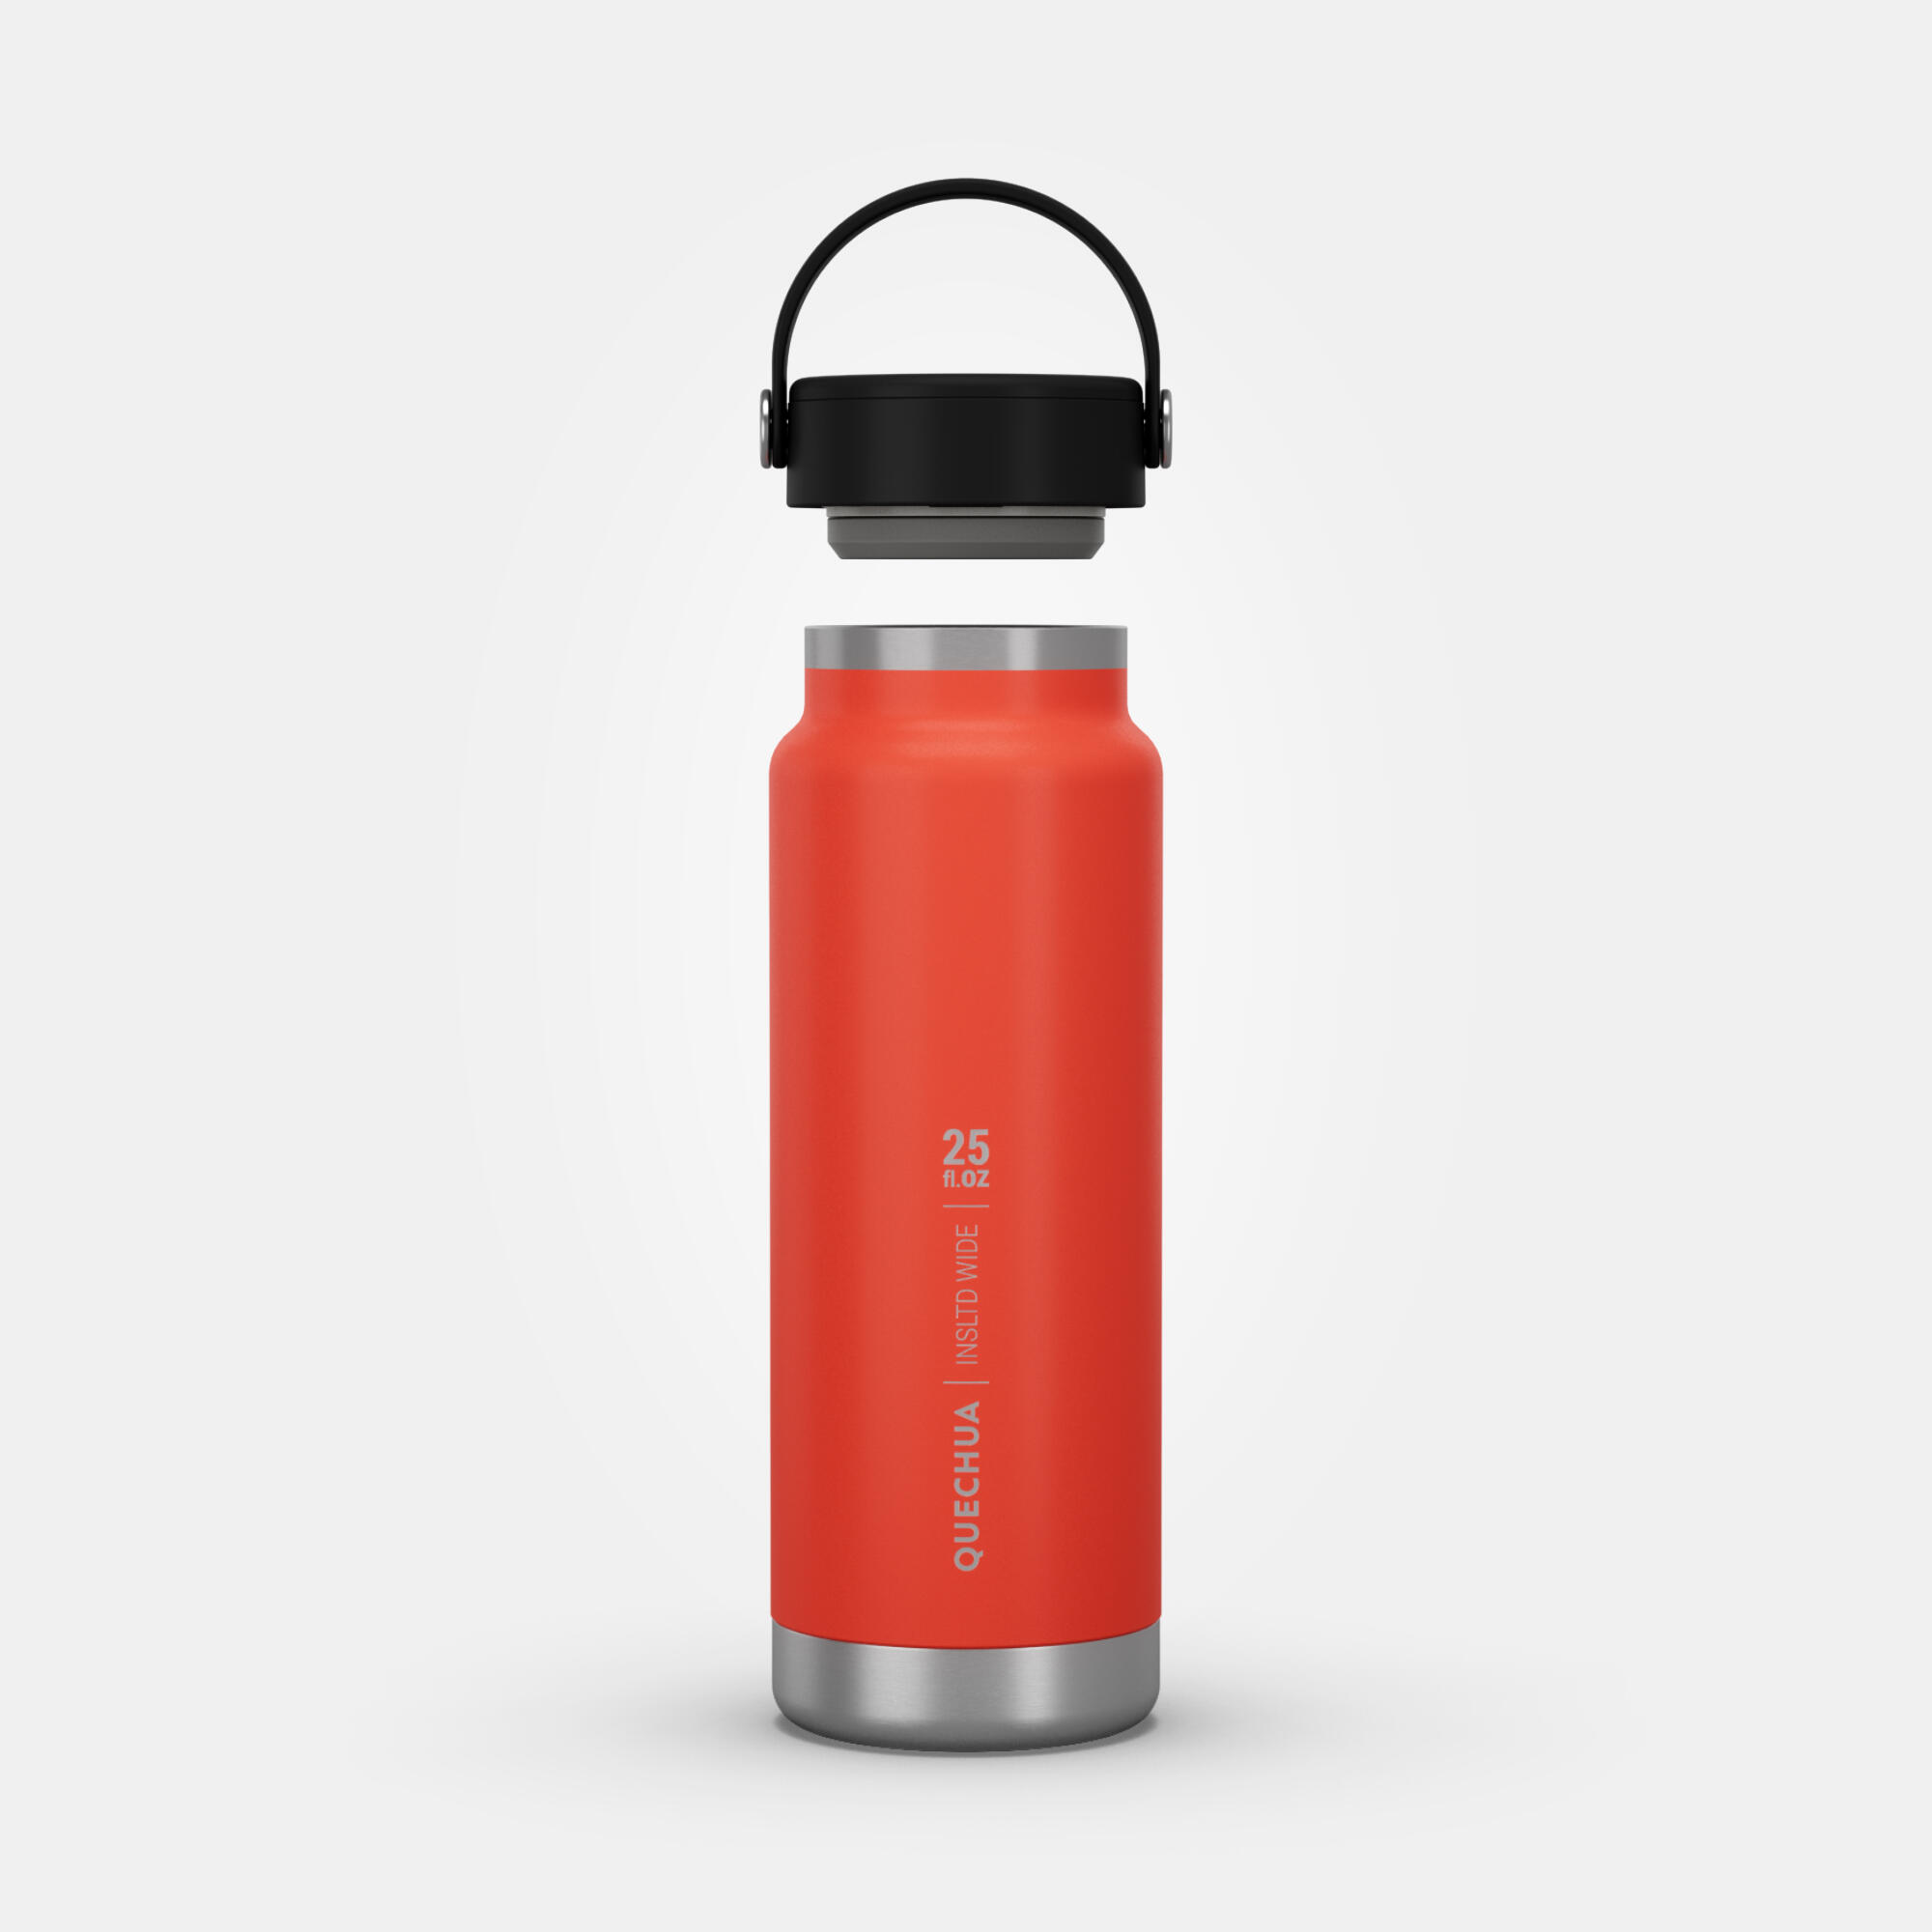 Isothermal Flask MH100 (s/steel double wall with air gap) 0.75 wide opening Red 2/11